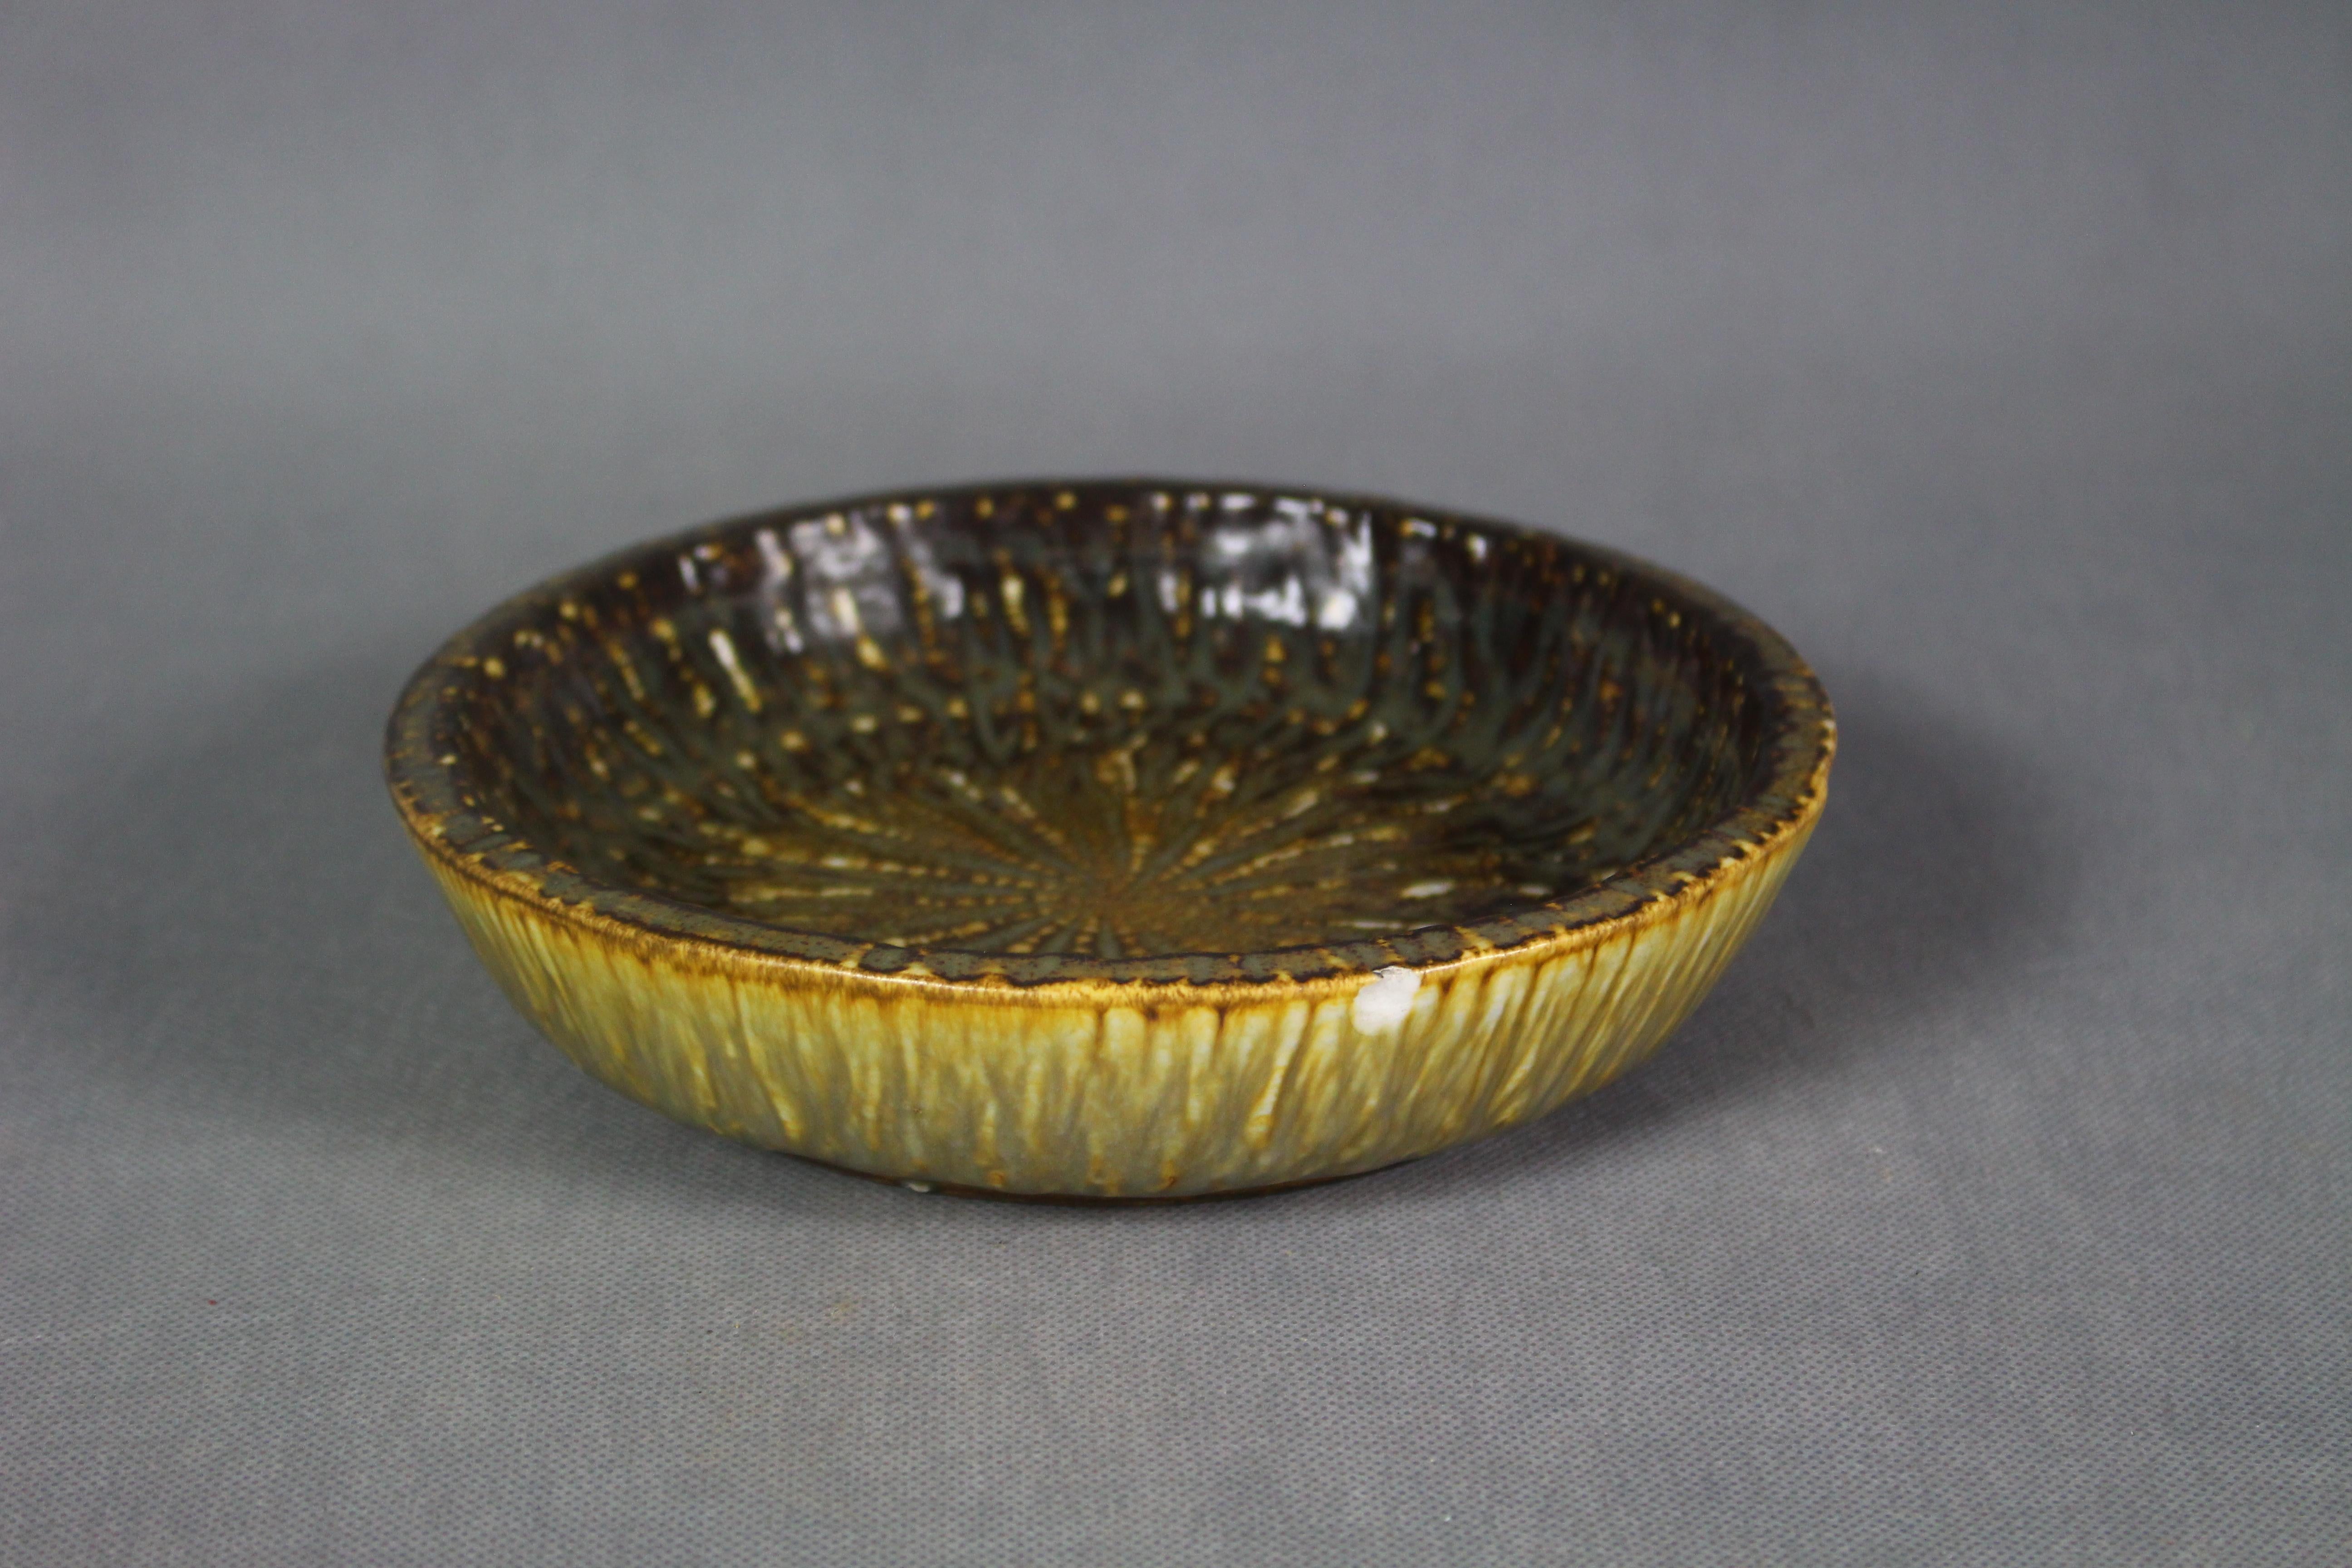 Gunnar Nylund bowl in earth tone colors, matte glazed in brown and yellow. This bowl is made by ceramics artist Gunnar Nylund for Swedish porcelain and stoneware factory Rorstrand (Rörstrand) in the 1940s and the series is called Chamotte.
 